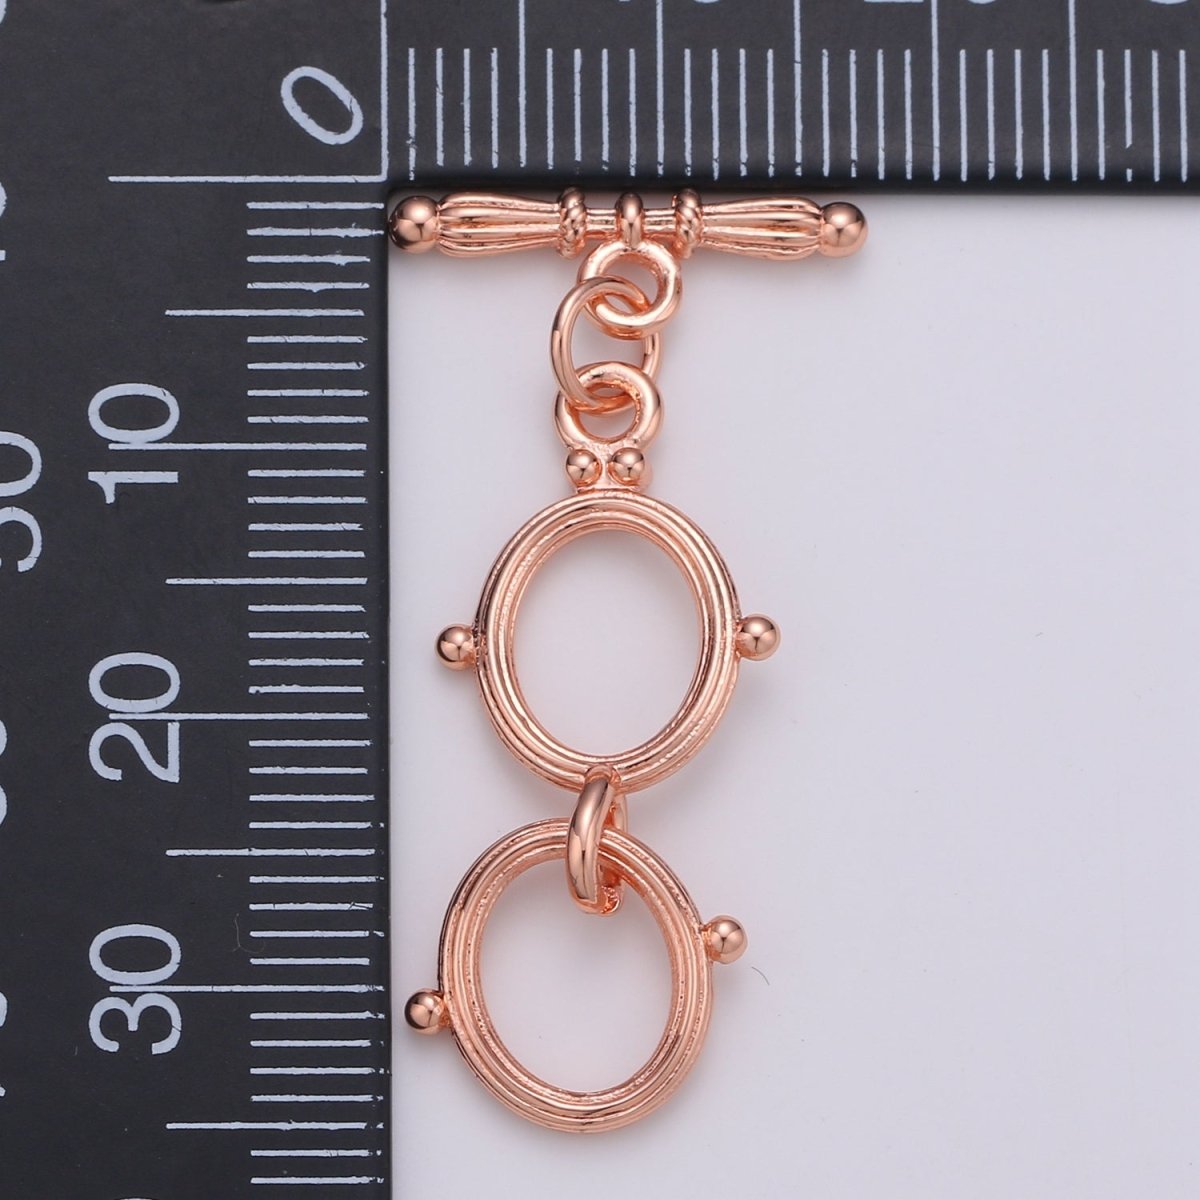 Gold Buoy Toggle Clasp with Jumpring Ship Sailor Clasp Gold Filled Toggle Clasp L-096~L-099 - DLUXCA